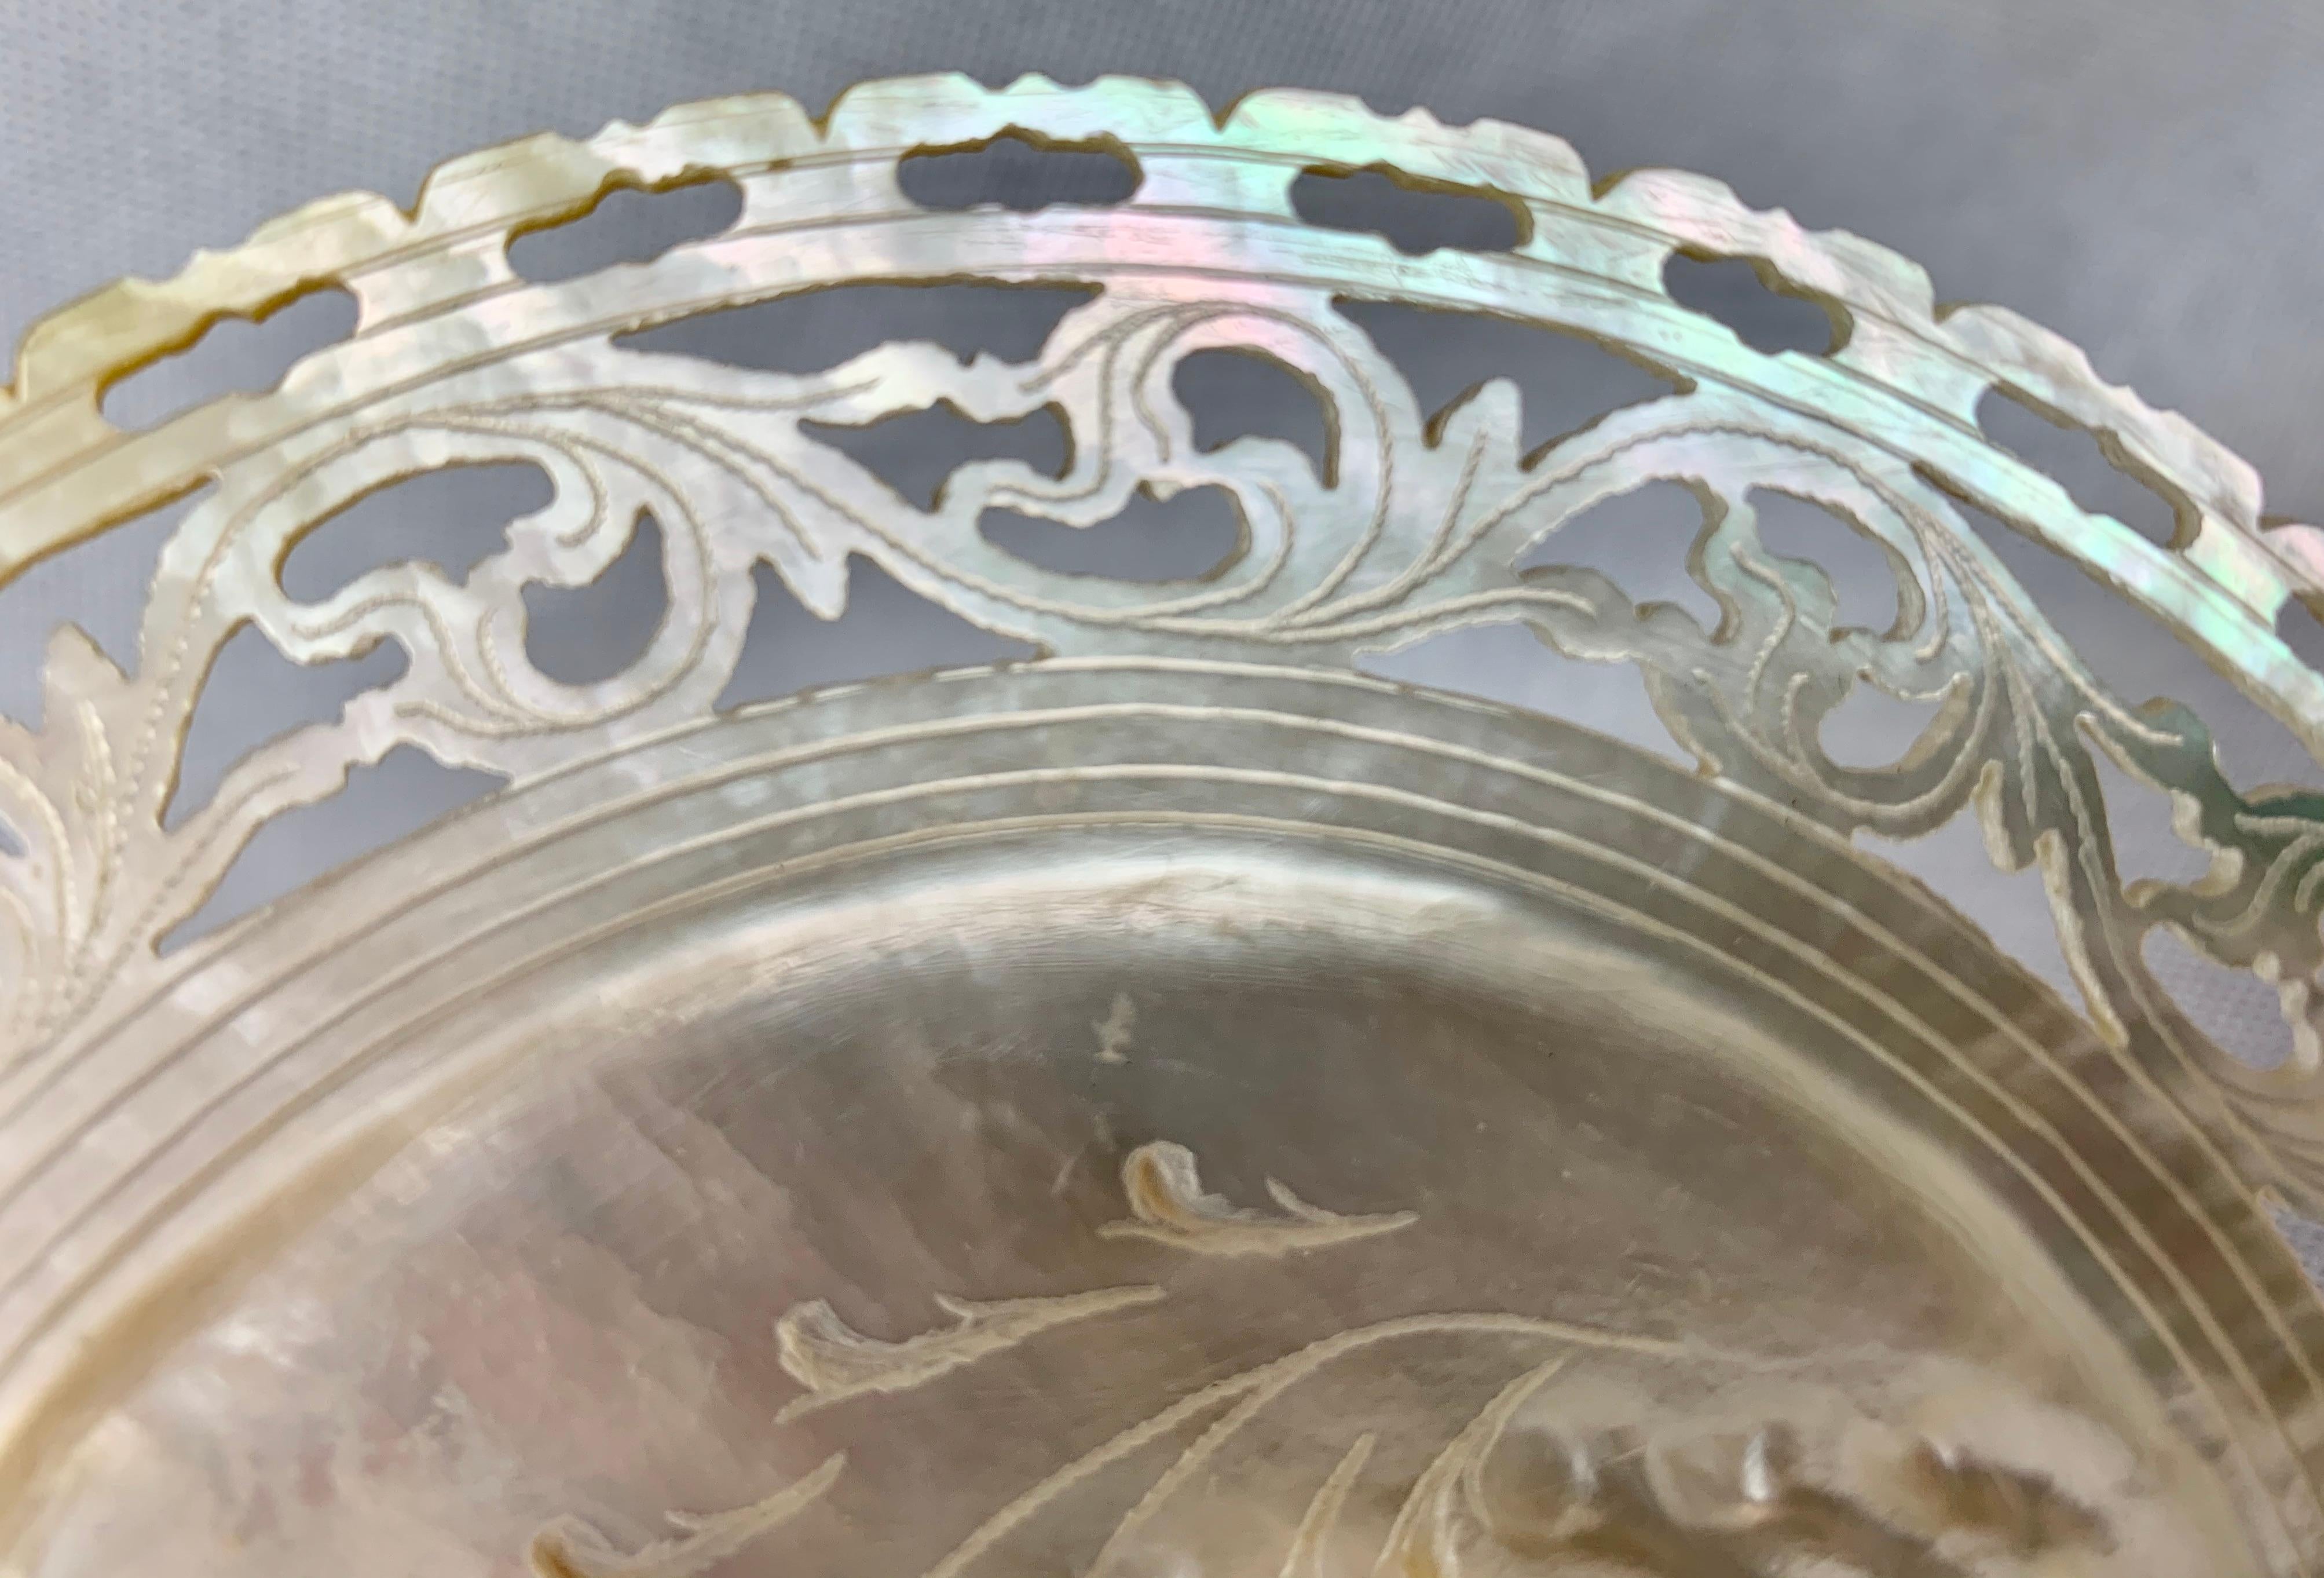 Chinese Export   Reticulated and Carved Mother of Pearl Caviar Dish-China Trade Period 